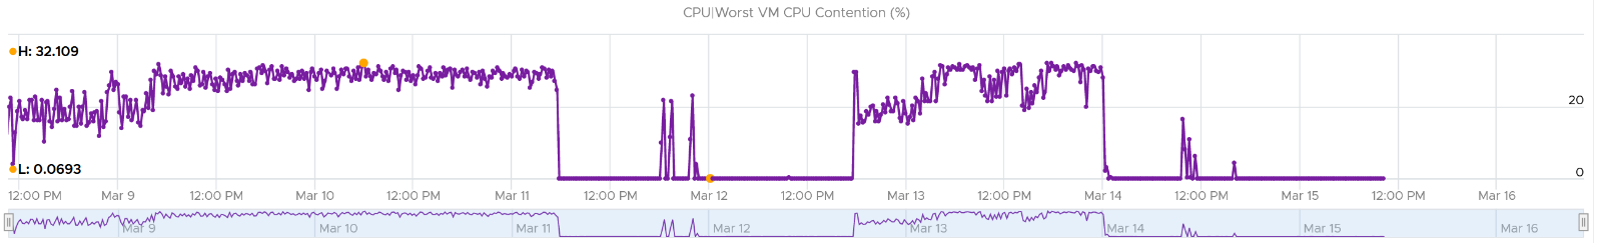 Worst VM in cluster chart